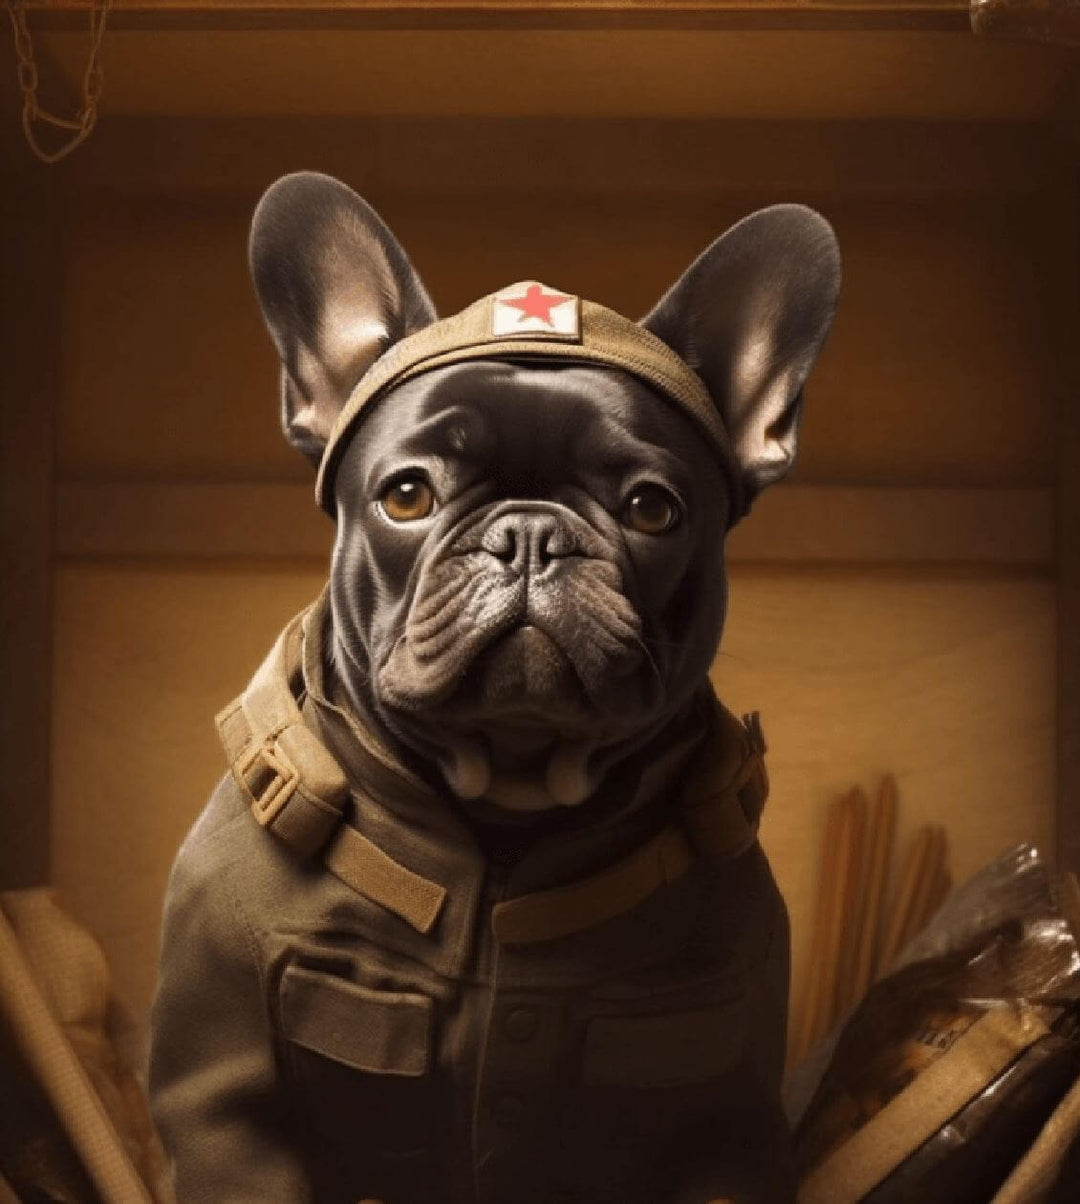 Meet Mutt, the Frenchie hero of the First World War!